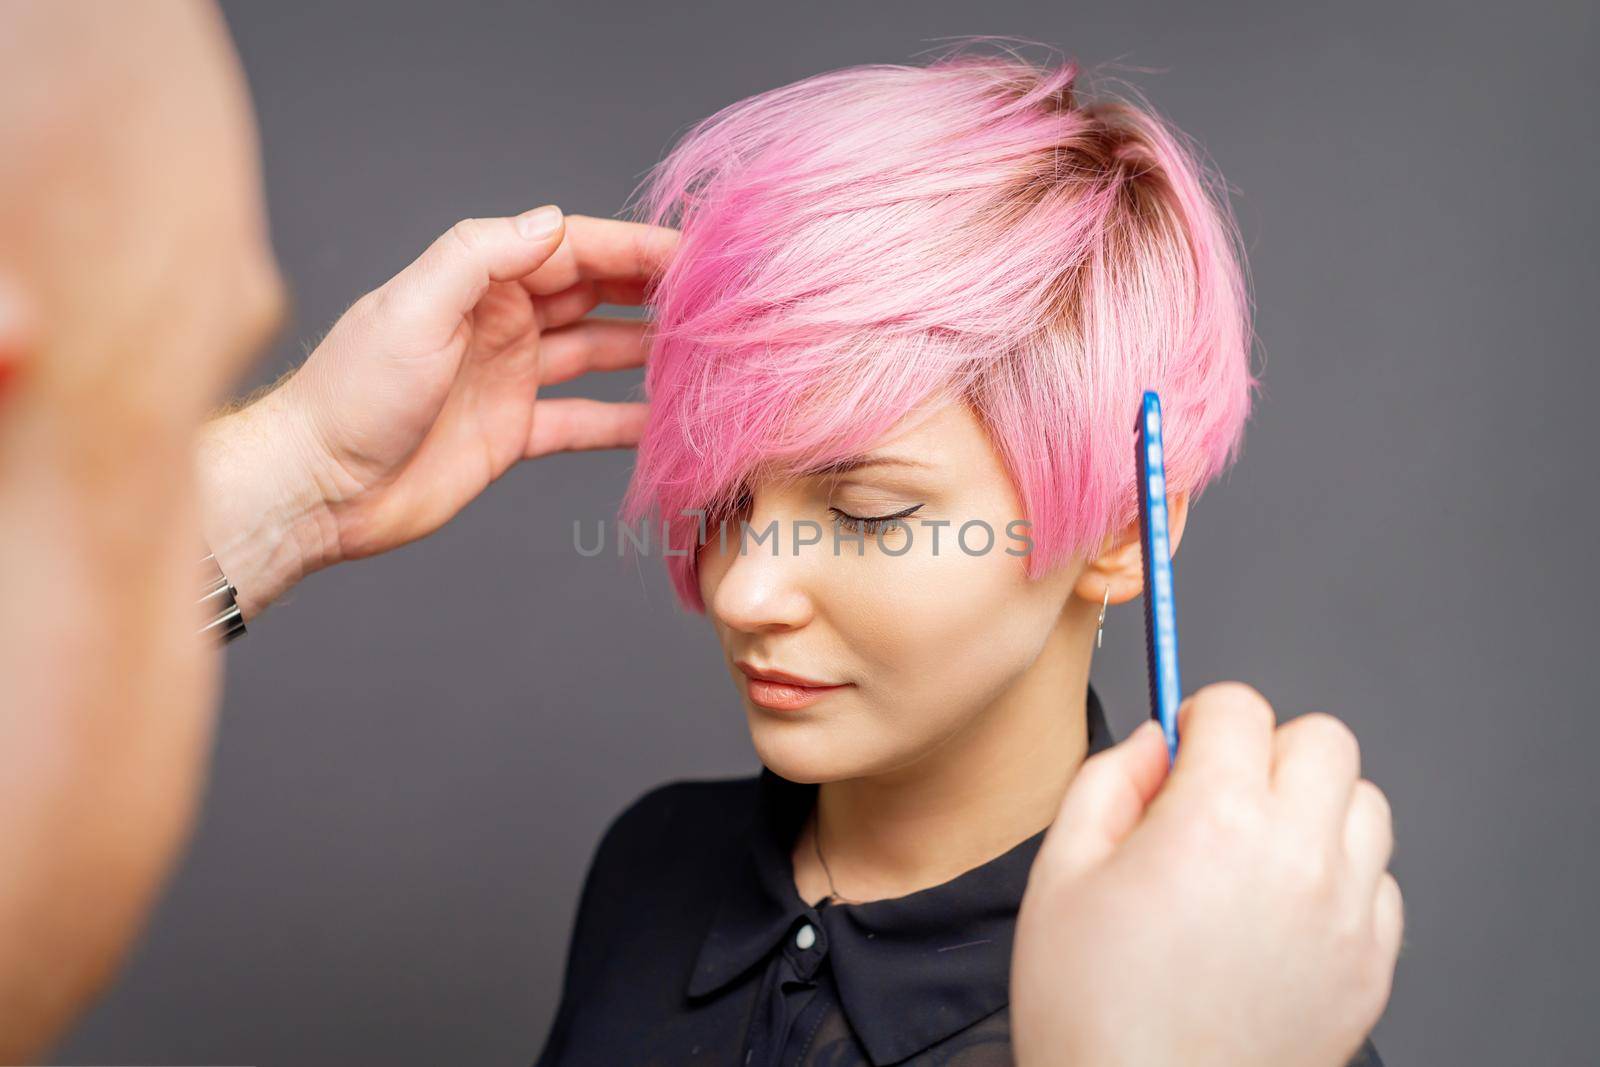 Hairdresser checking short pink hairstyle of young woman on gray background